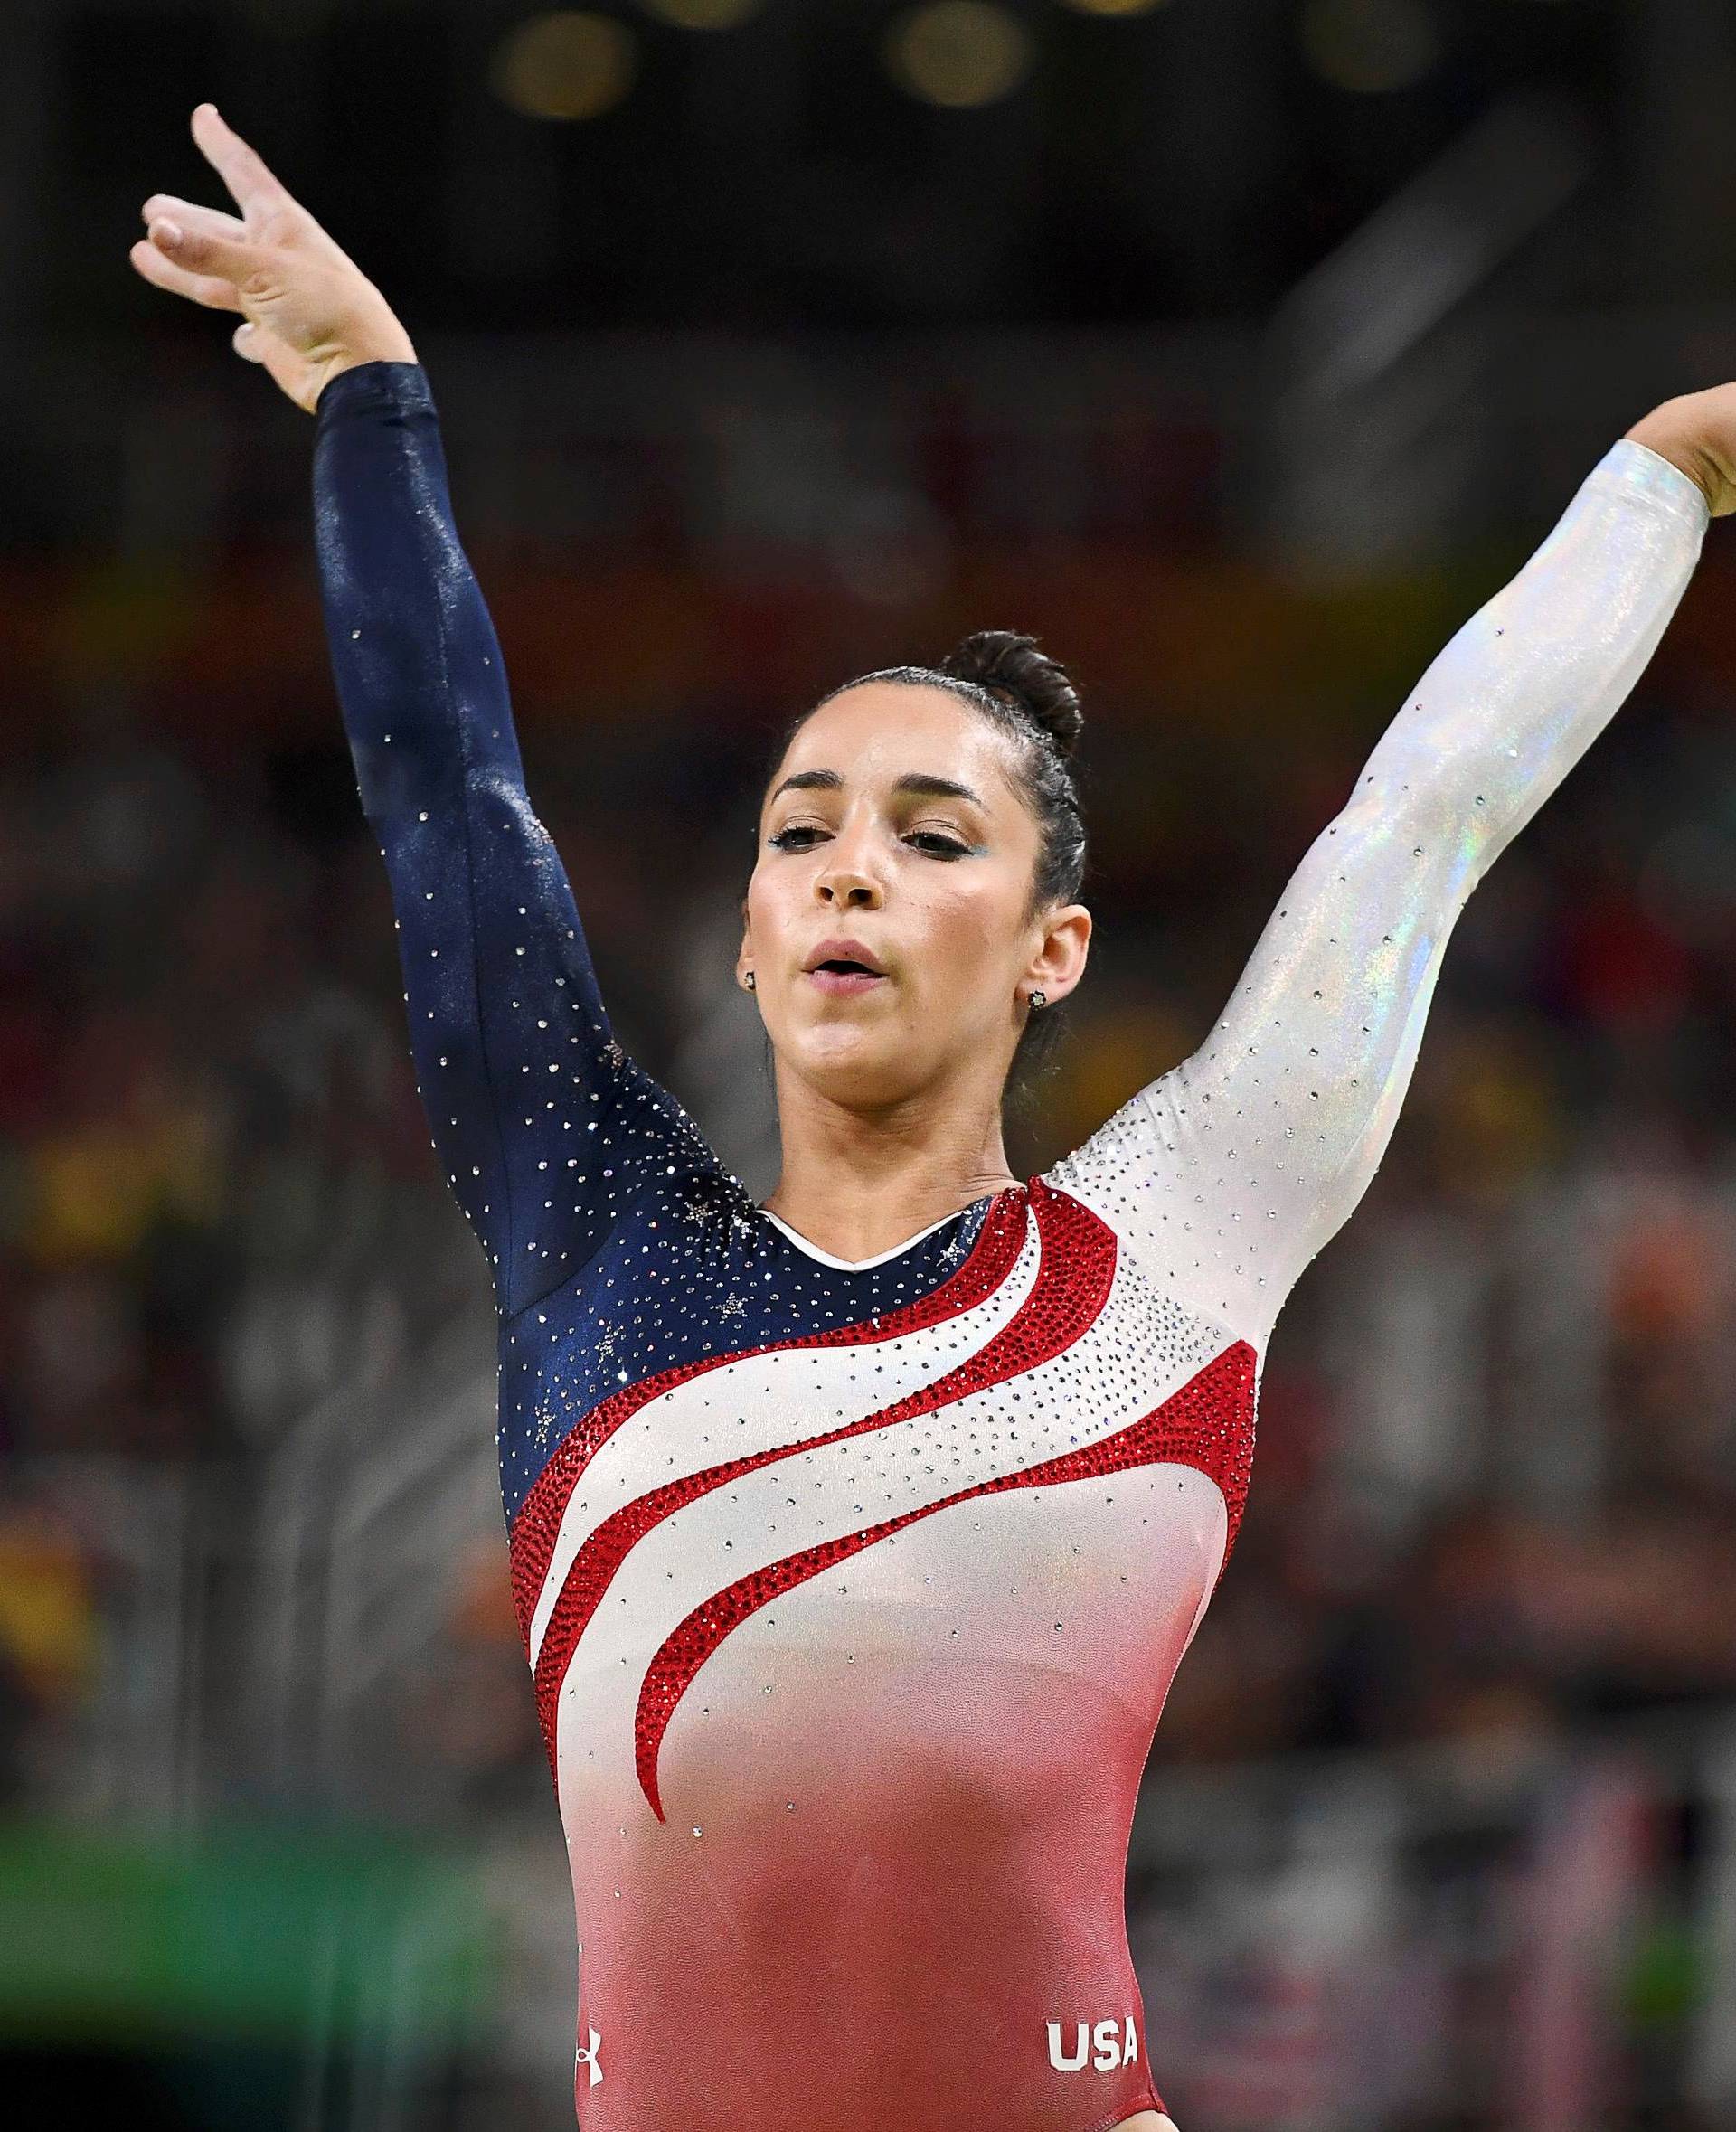 FILE PHOTO: Alexandra Raisman of USA competes on the beam during the women's team final in Artistic Gymnastics at the 2016 Rio Olympics in Rio de Janeiro